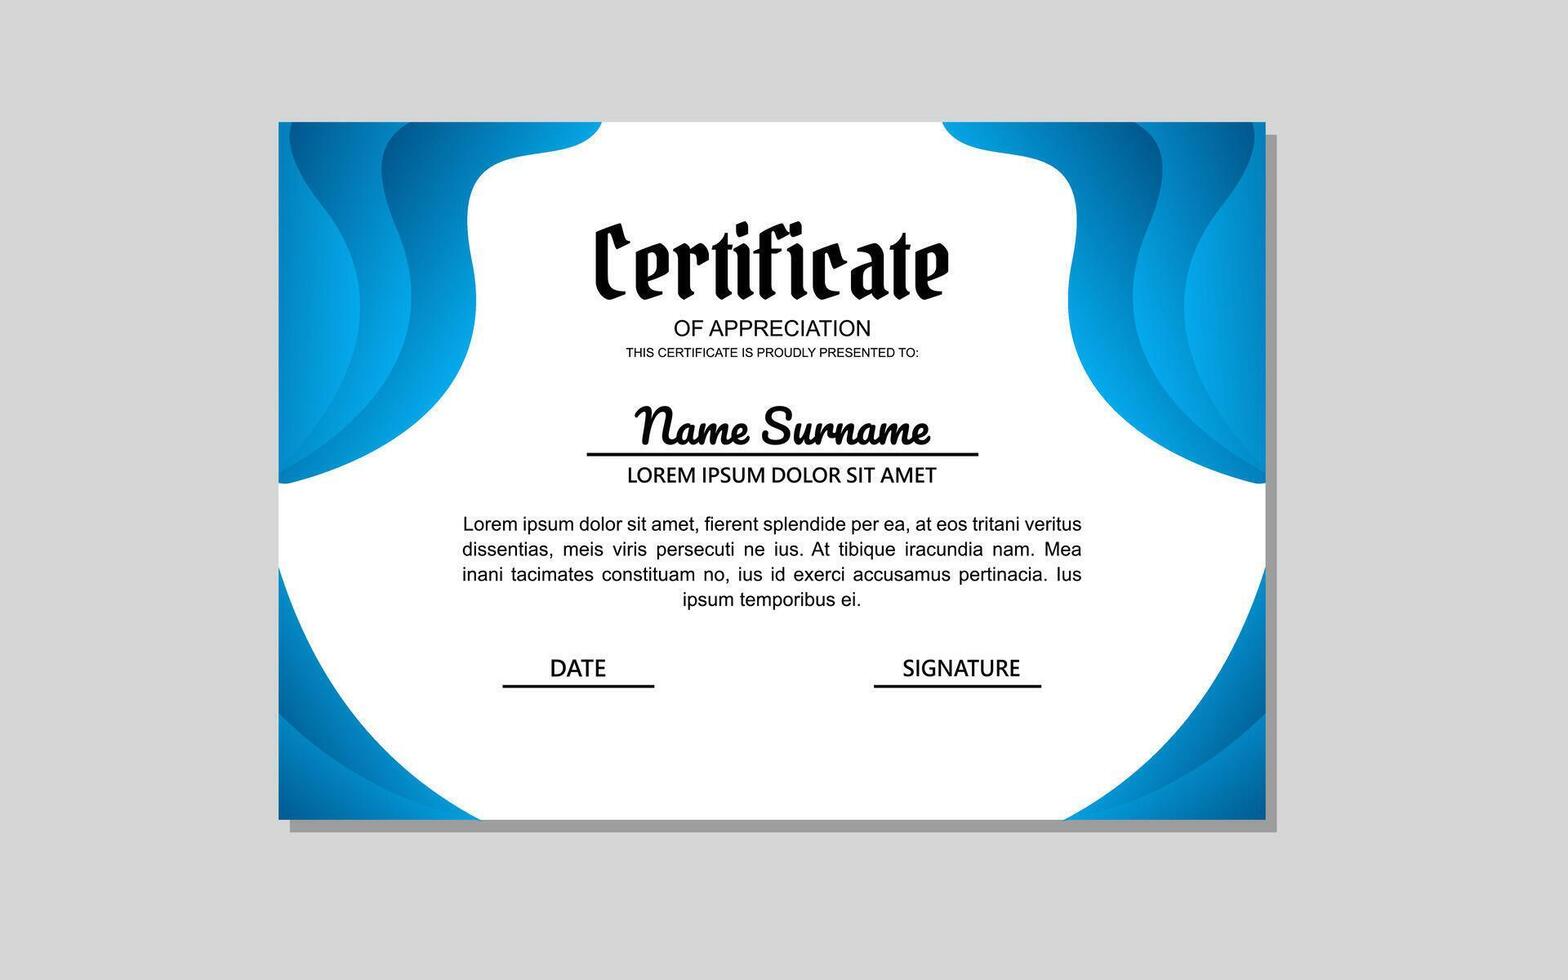 Certificate template design in blue abstract style for education and business appreciation vector